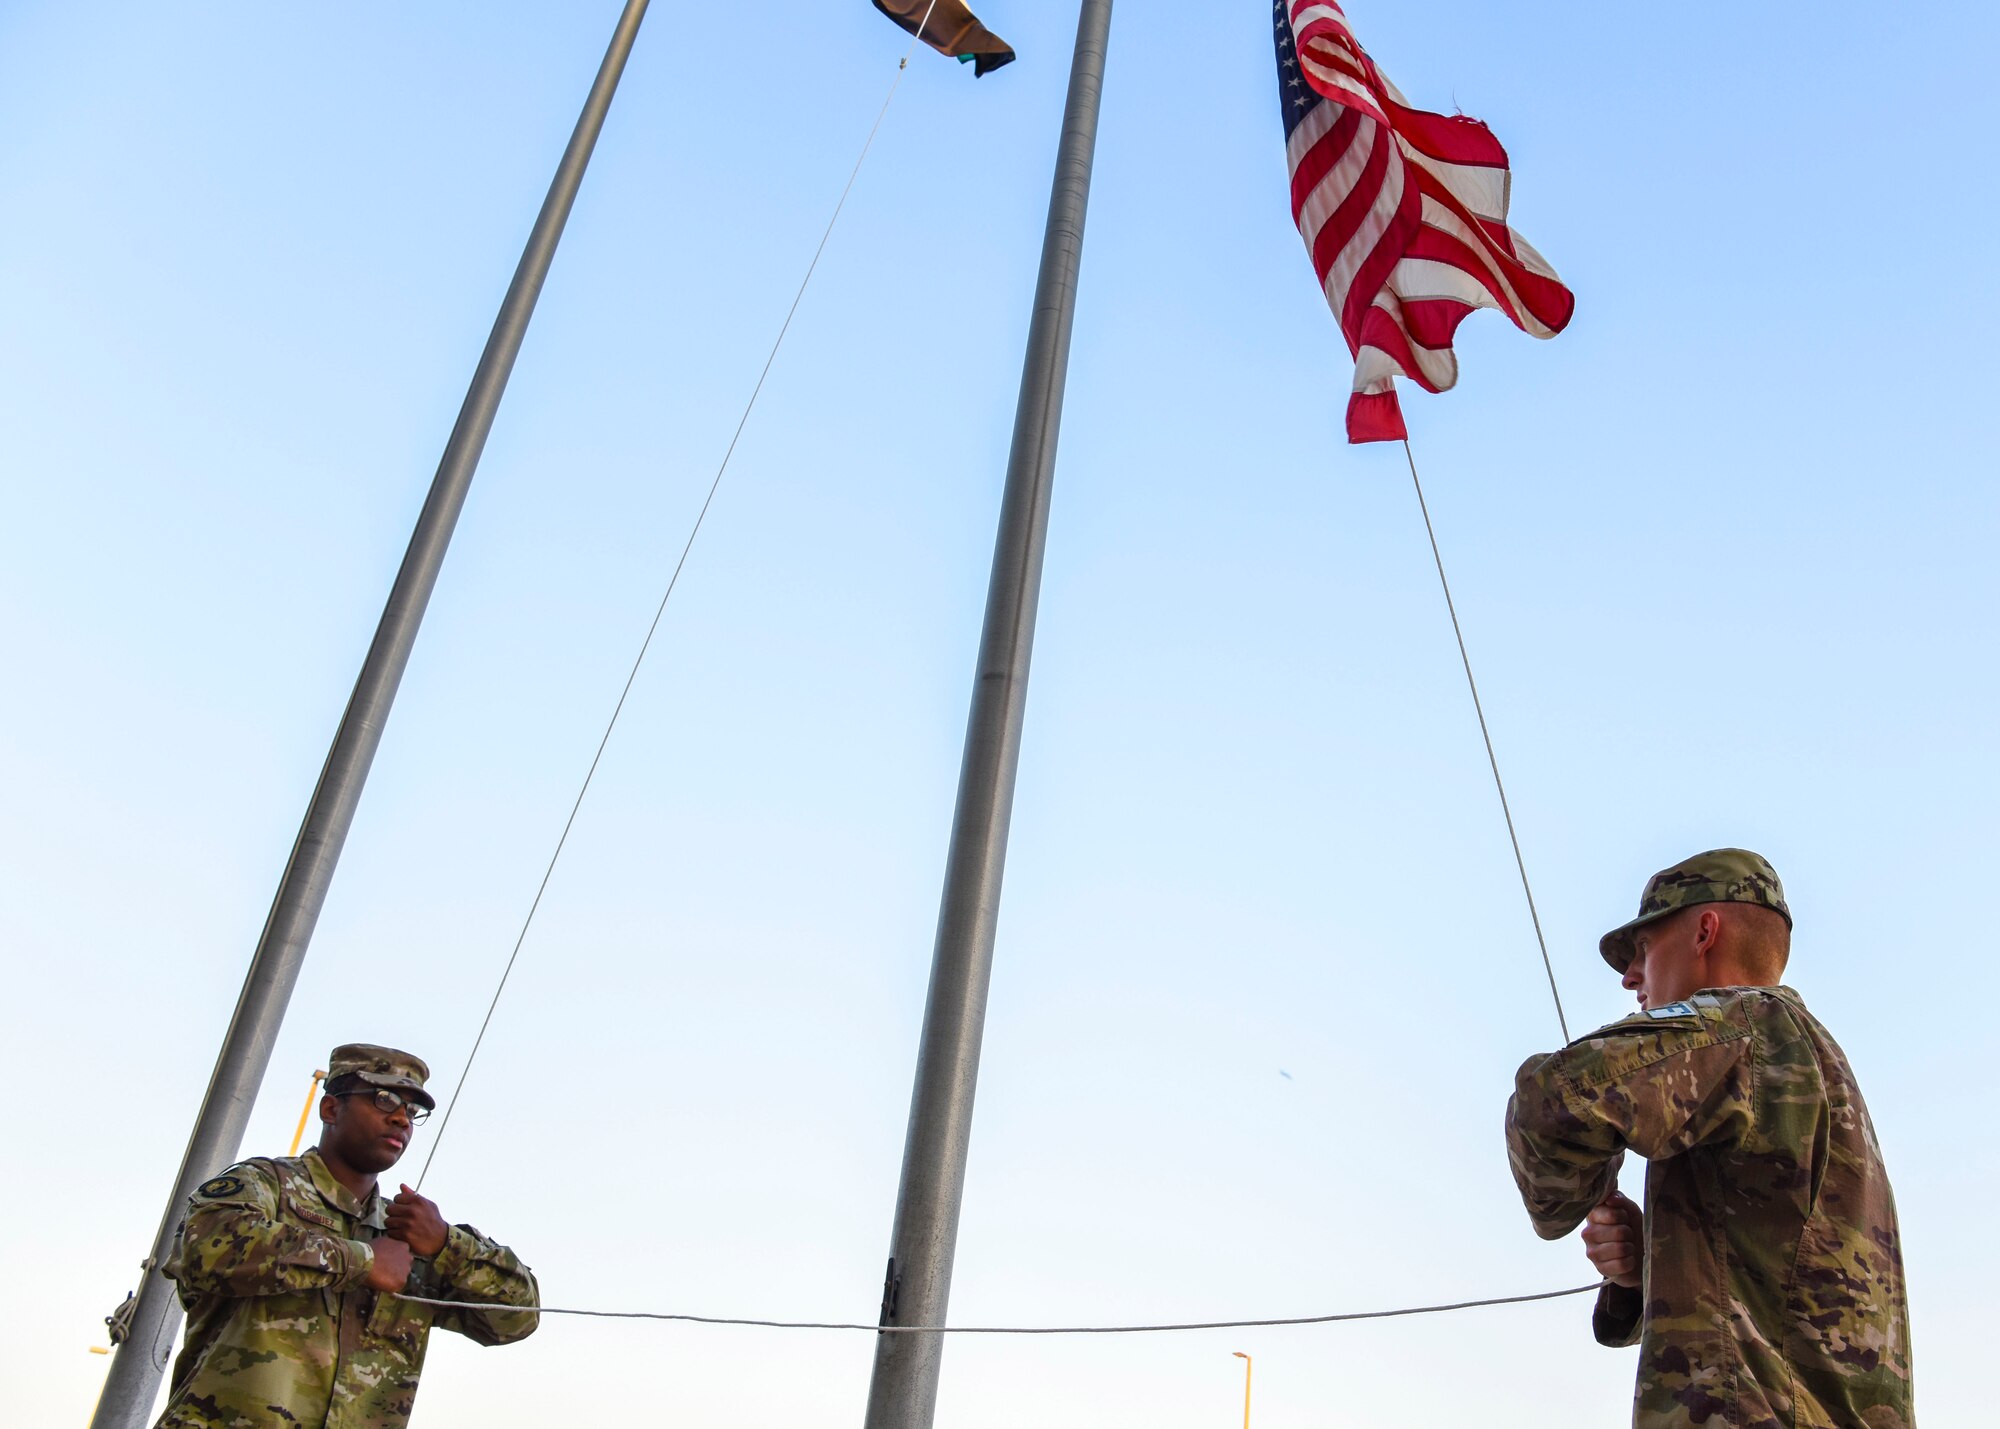 SrA William Rodriguez and SrA Johnathan Coble, 380th Expeditionary Security Forces Squadron, begin to lower the flag during a monthly retreat ceremony at Al Dhafra Air Base, United Arab Emirates, Dec. 7, 2018.